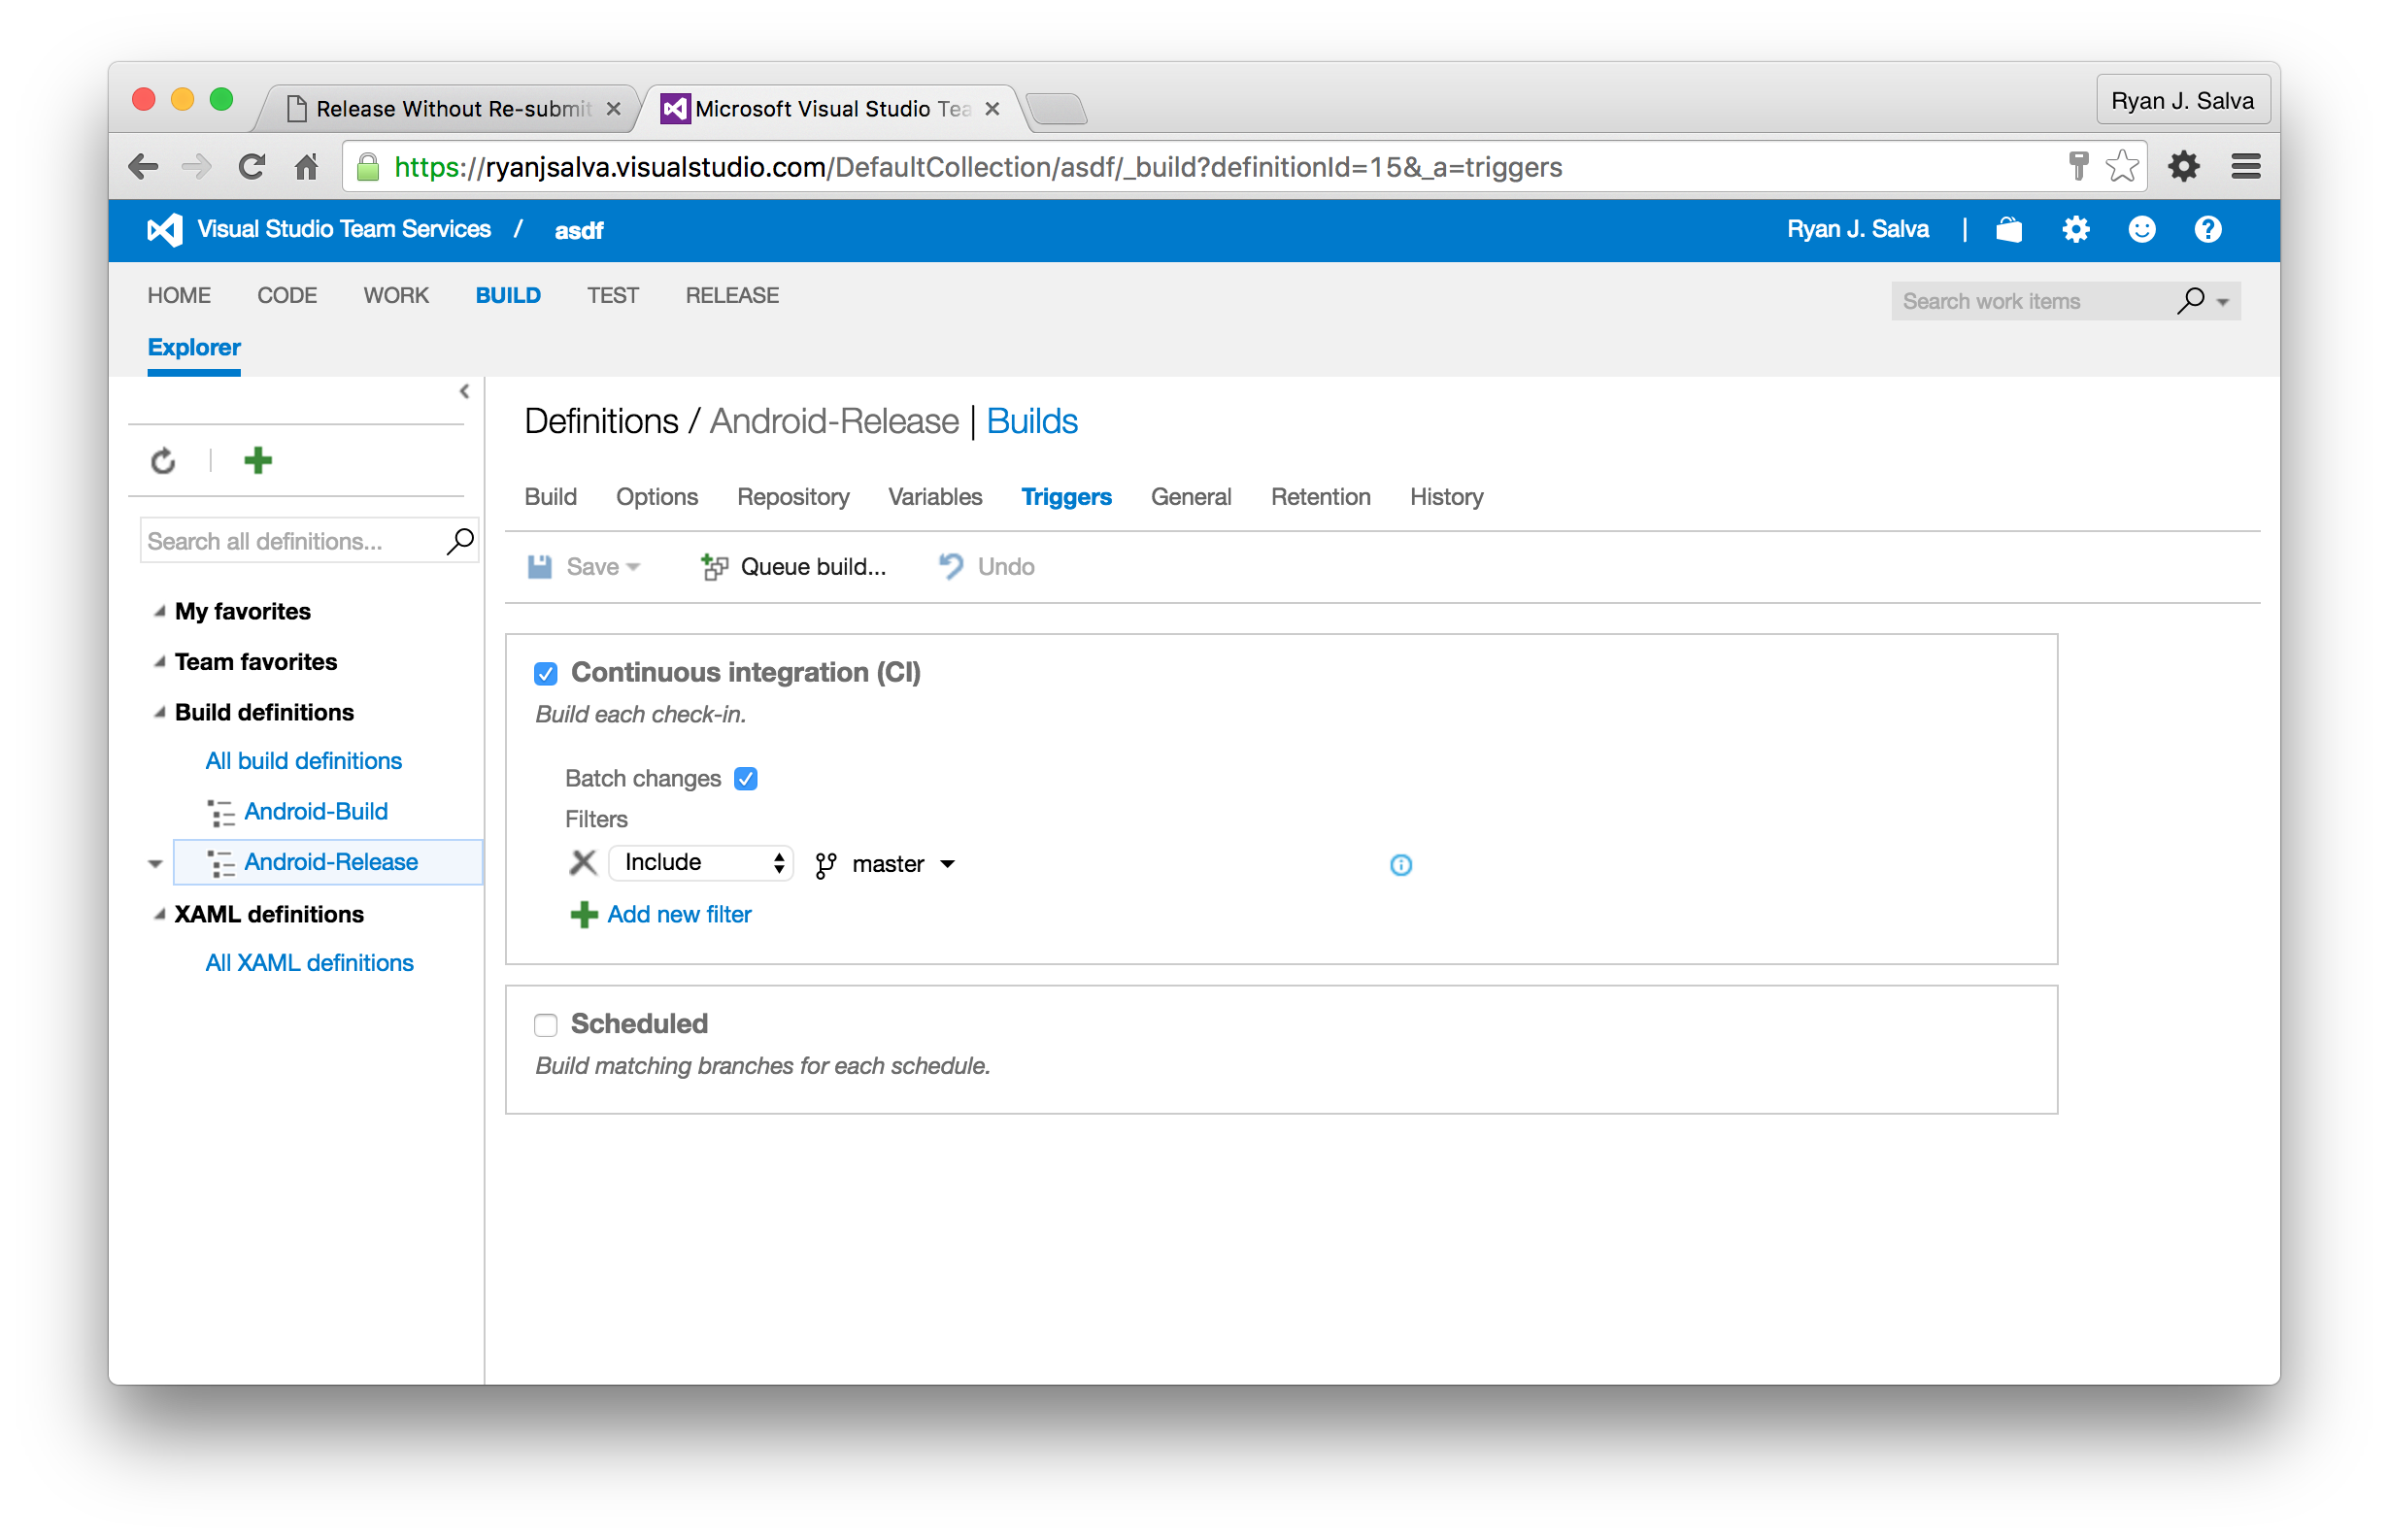 Triggers set to use Continuous Integration